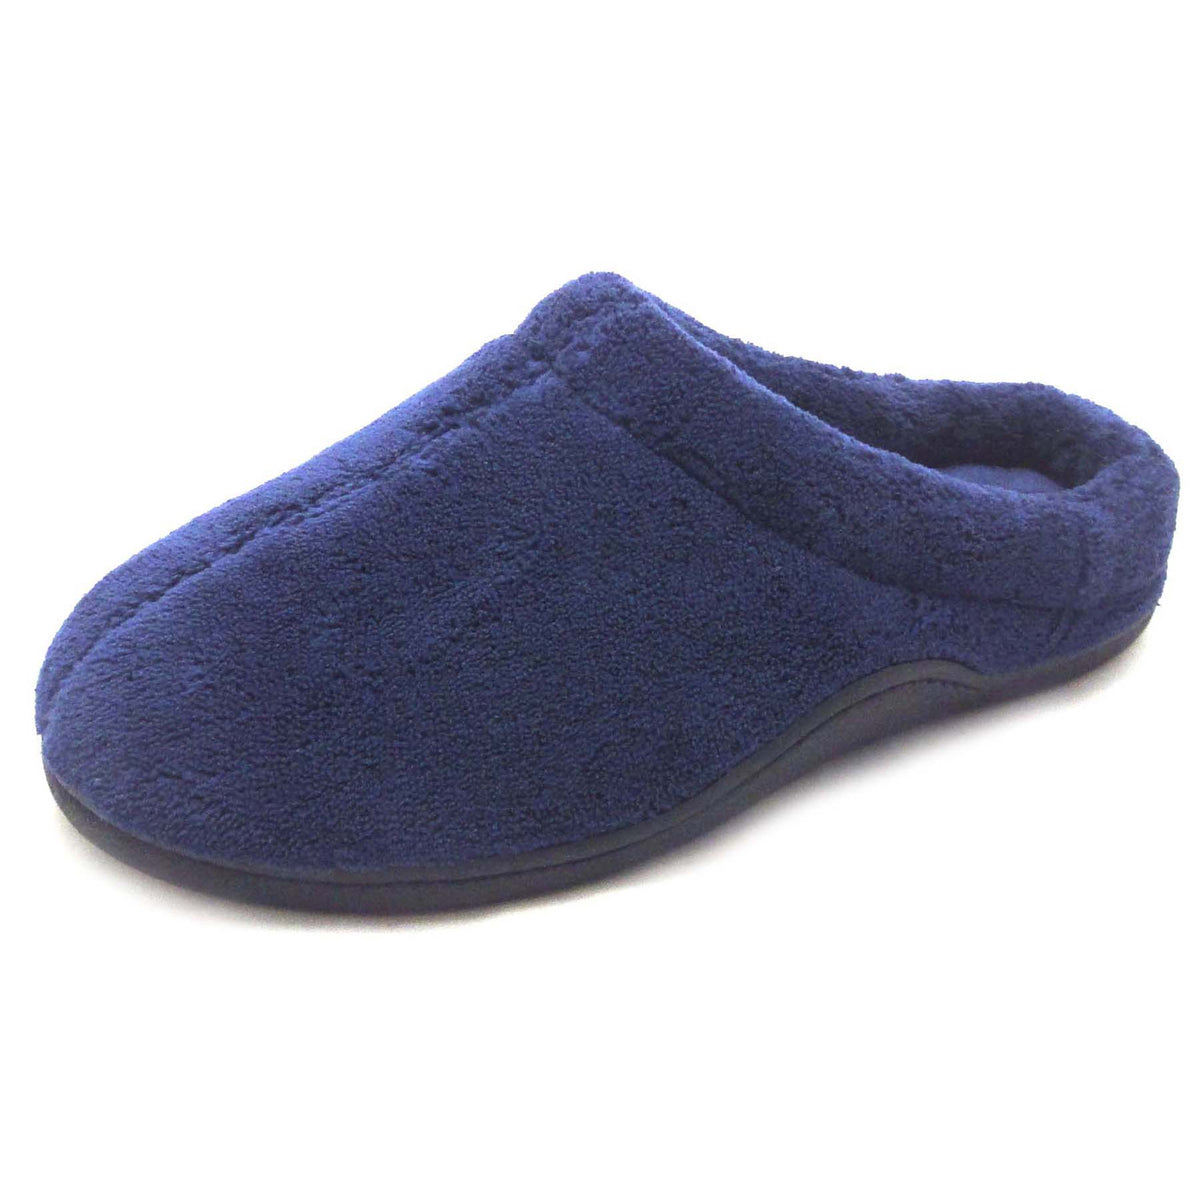 Isotoner Men’s Microterry Hoodback Slippers